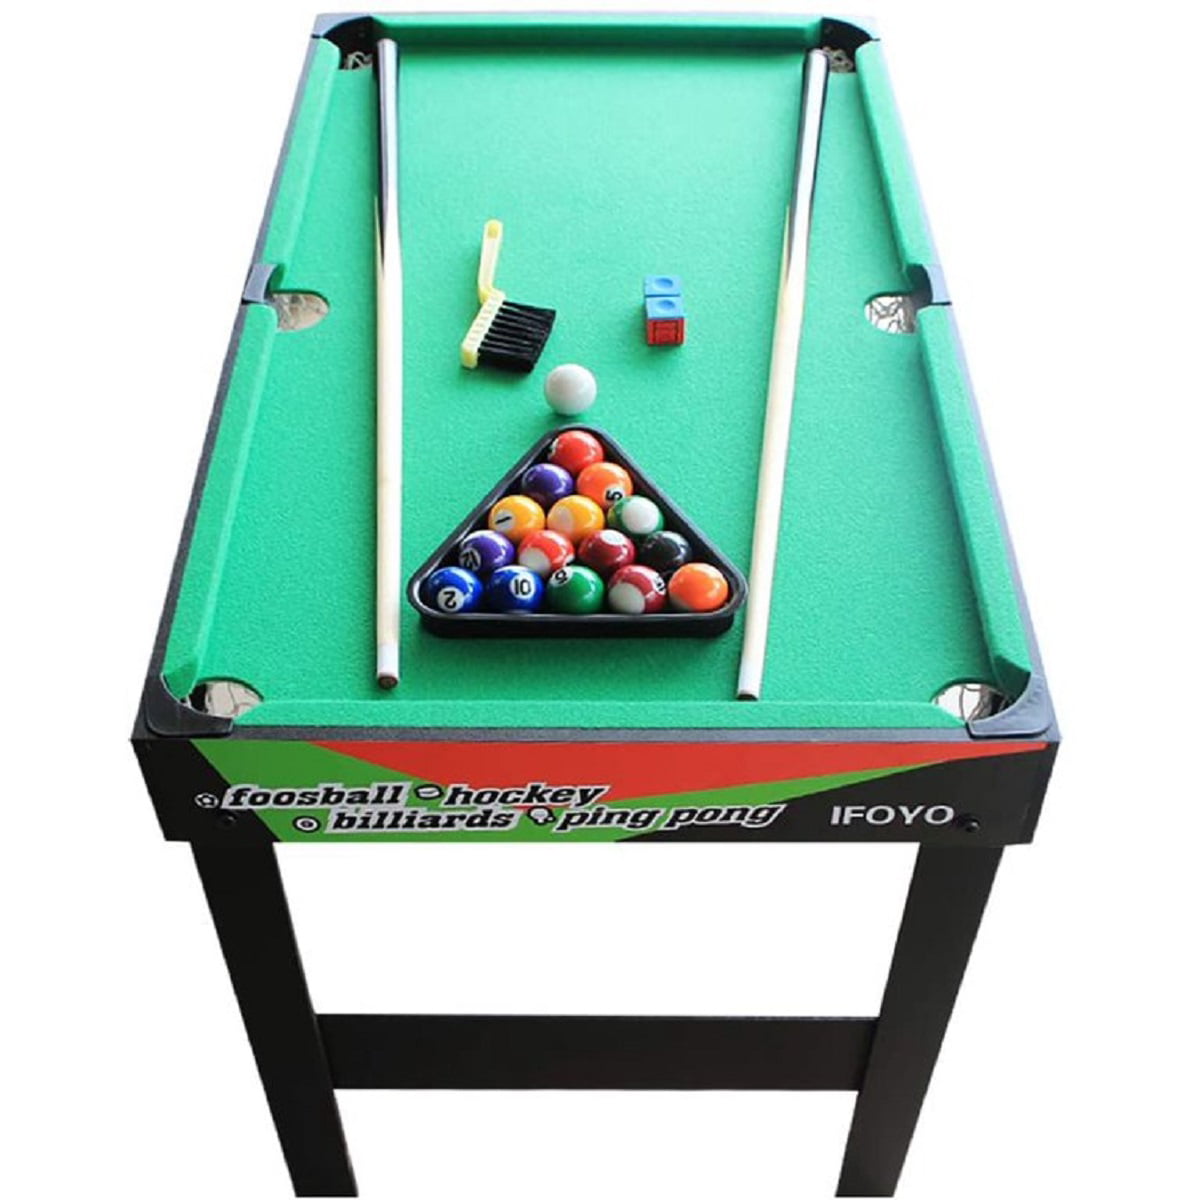 Buy Foldable 4 In 1 Multi Game Table Kids Play Indoor Table 4 Different Game  Pool Ball Soccer Table Tennis Air Hockey from Shanghai Variety Gift And Toy  Co., Ltd., China